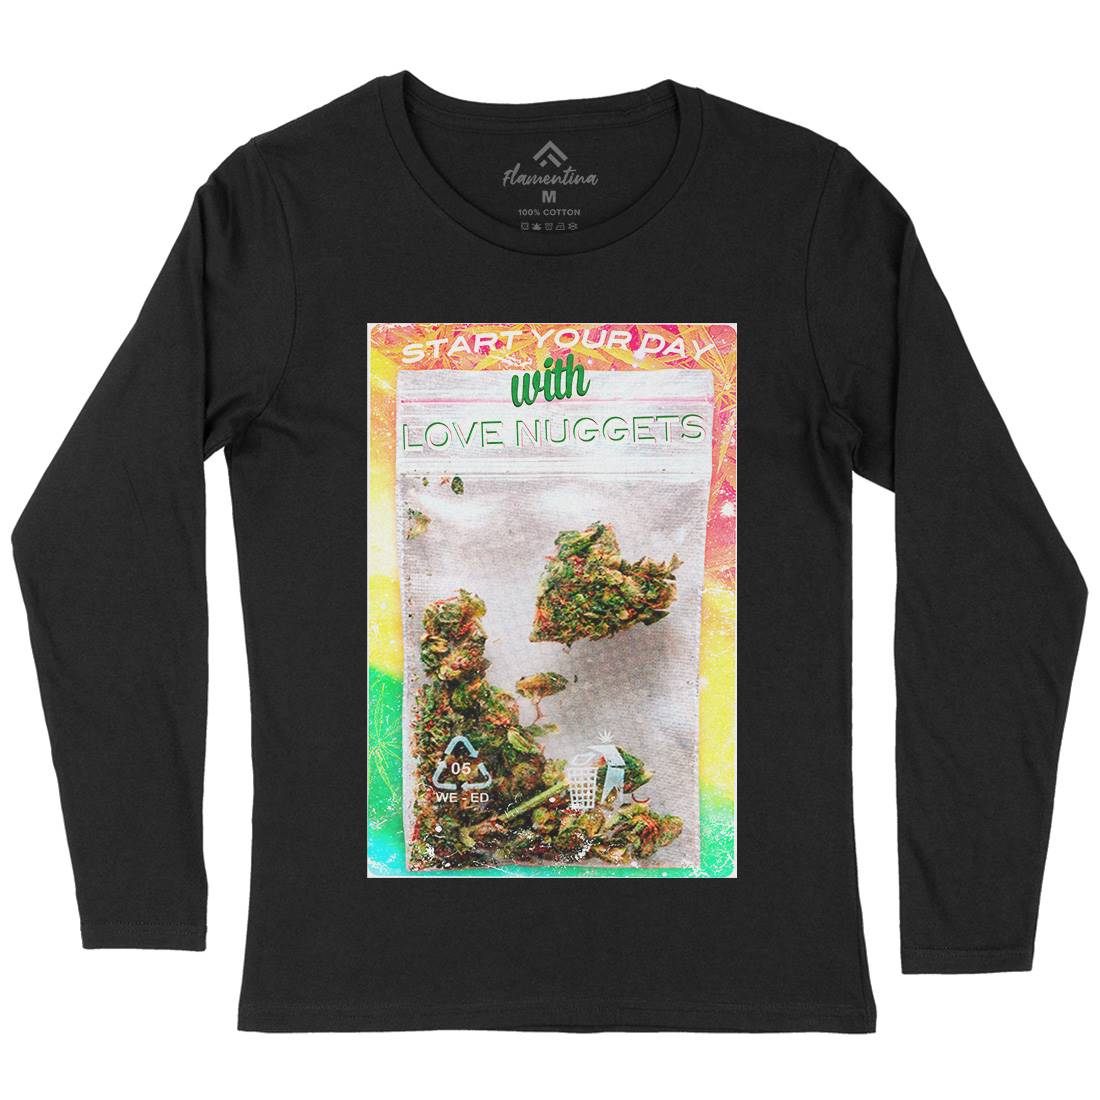 Love Nuggets Womens Long Sleeve T-Shirt Drugs A871